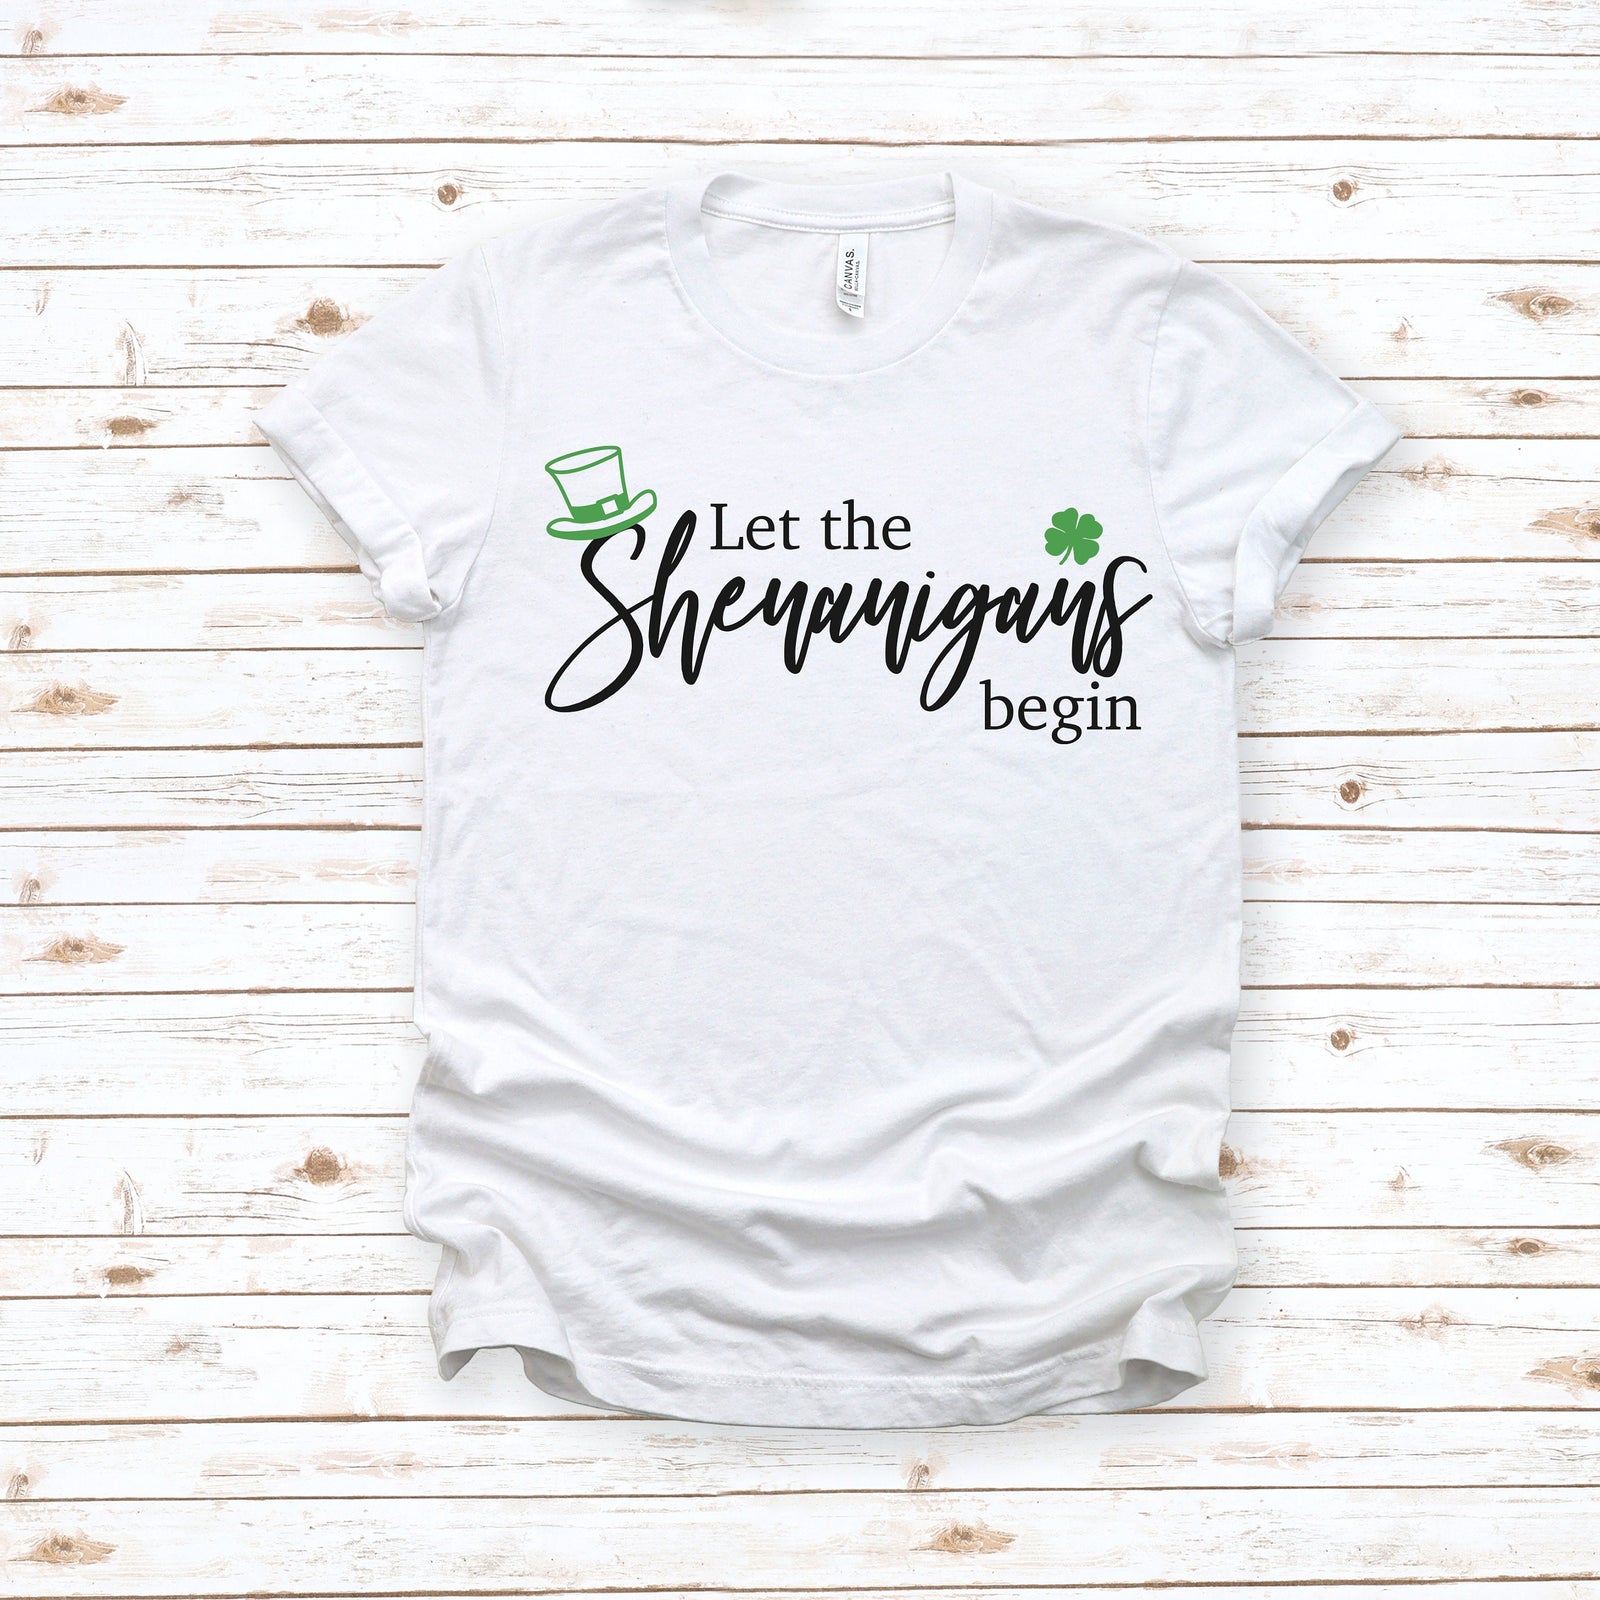 Let the Shenanigans Begin Adult T Shirt - St. Patrick's Day Funny Shirt - Lucky - Green